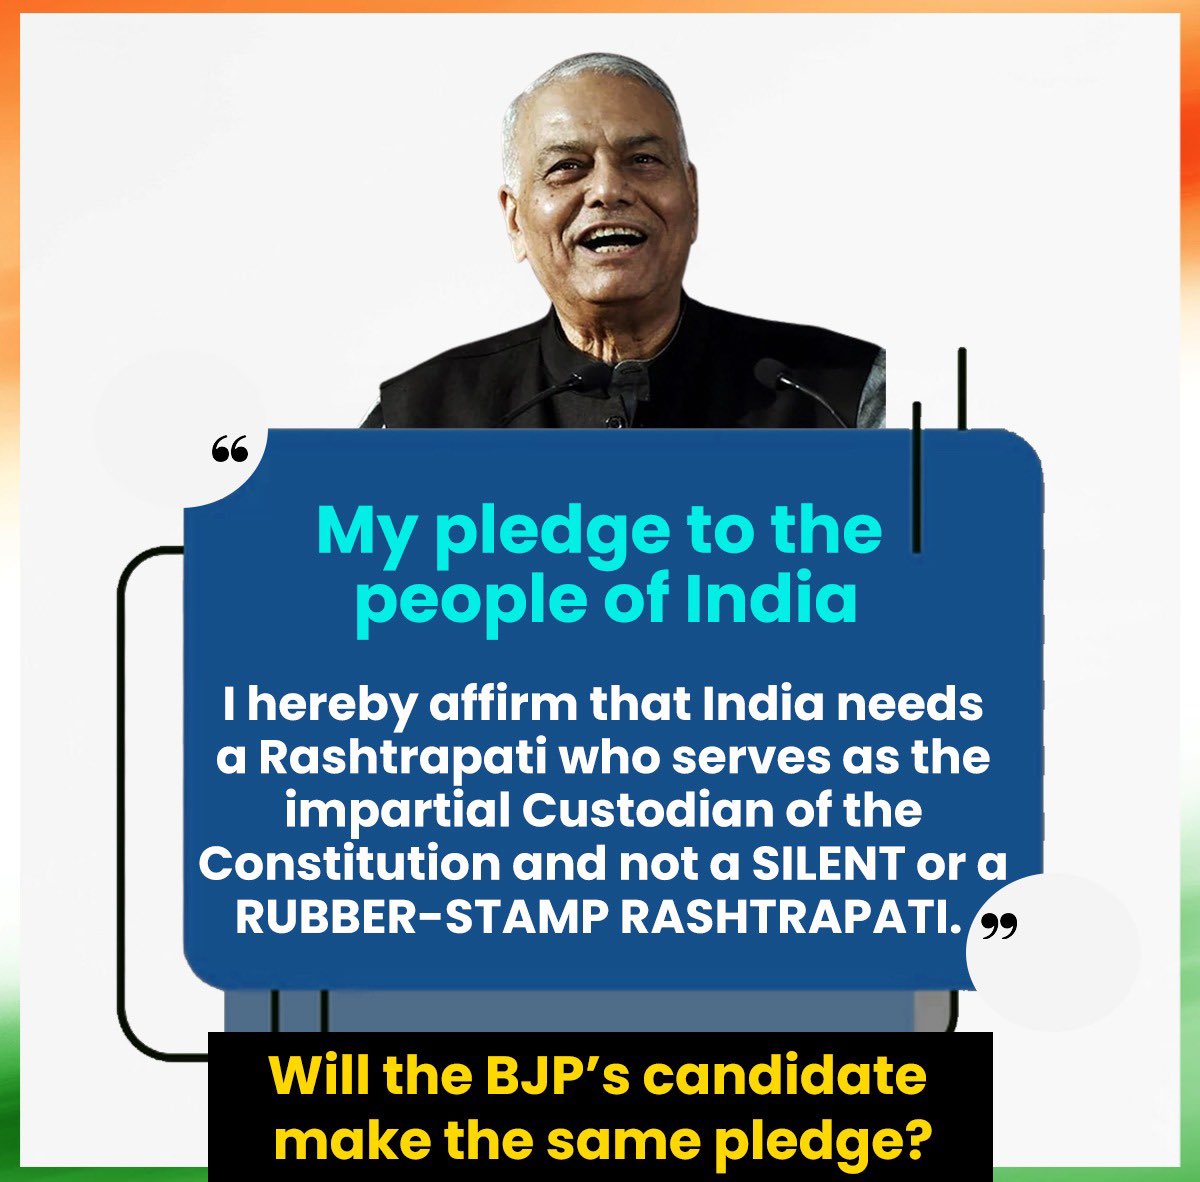 To ensure a better future for all Indians, the Rashtrapati must work conscientiously. I pledge that, upon being elected as President, I’ll serve as an impartial Custodian of the Constitution; not a rubber stamp for the govt. I urge the BJP’s candidate to make the same pledge.